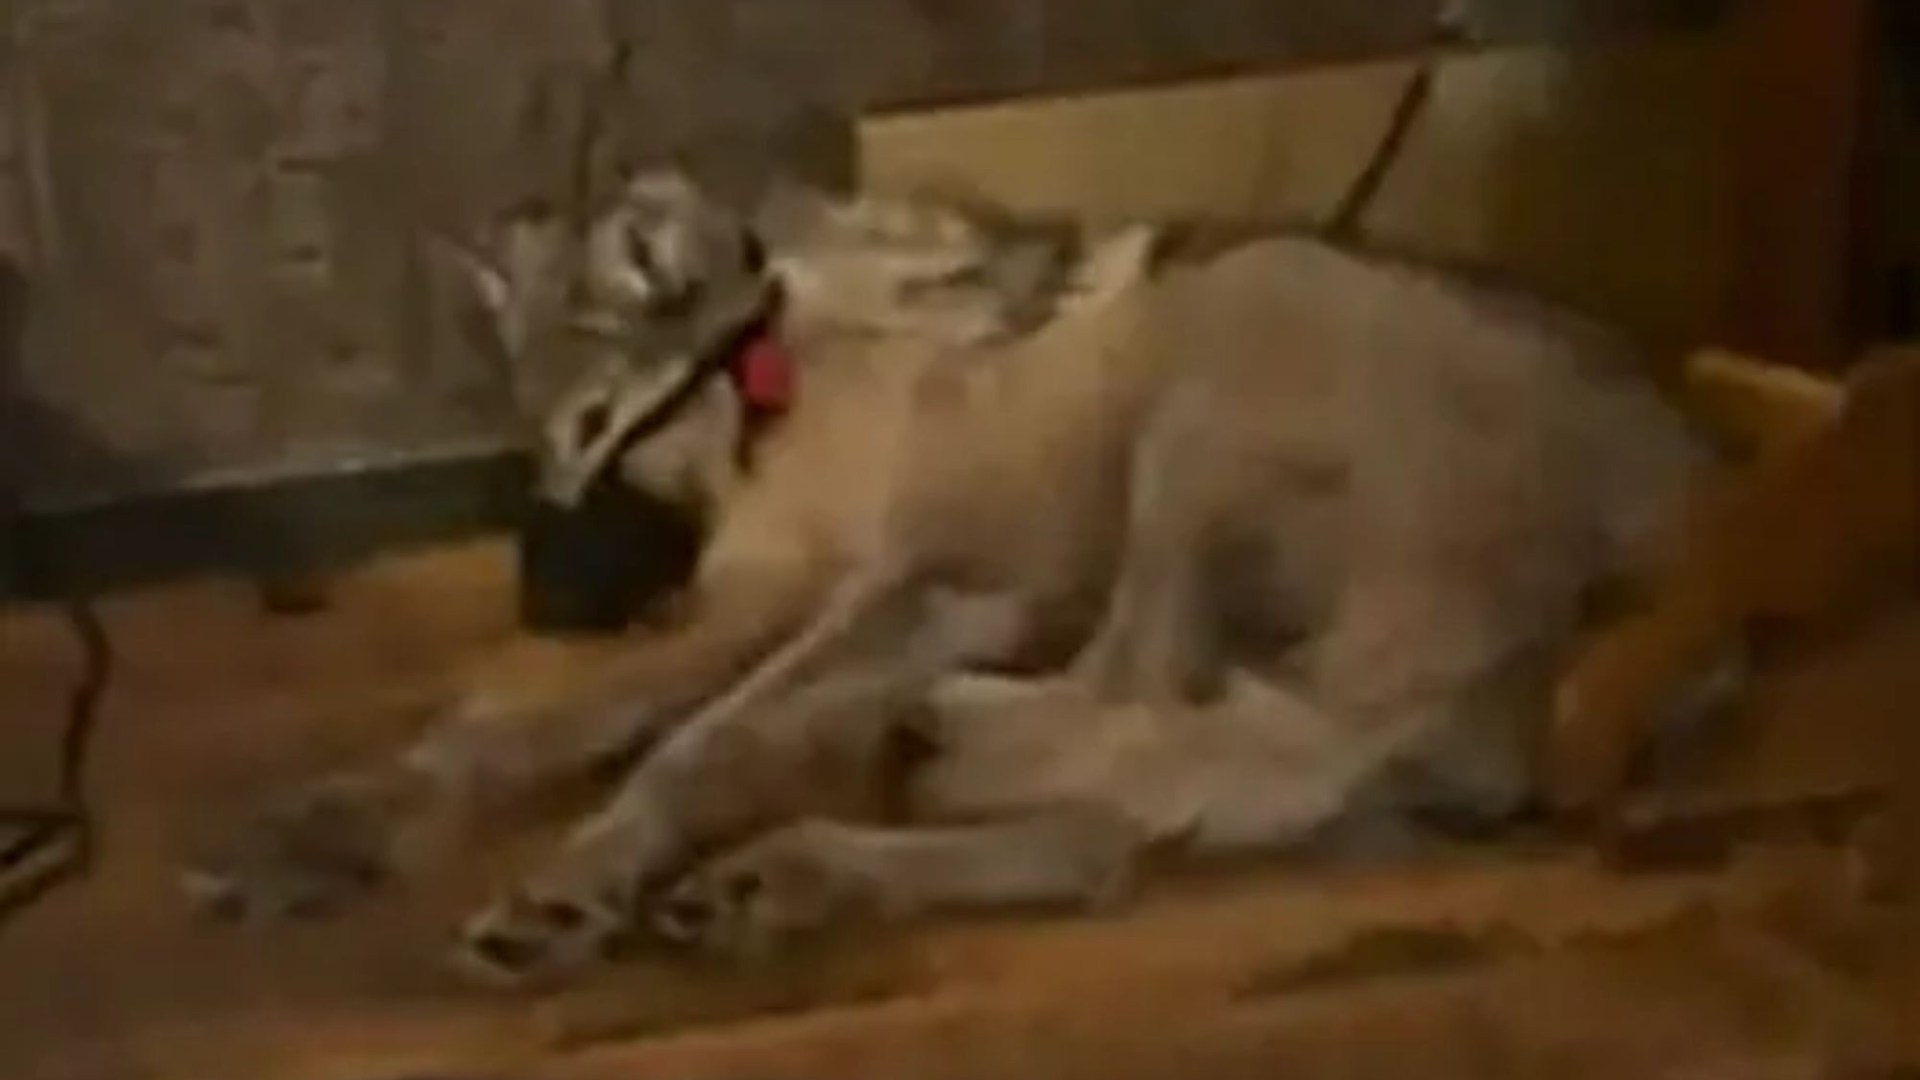 Heartbreaking wolf video: Final moments before being shot by hunter with taped mouth